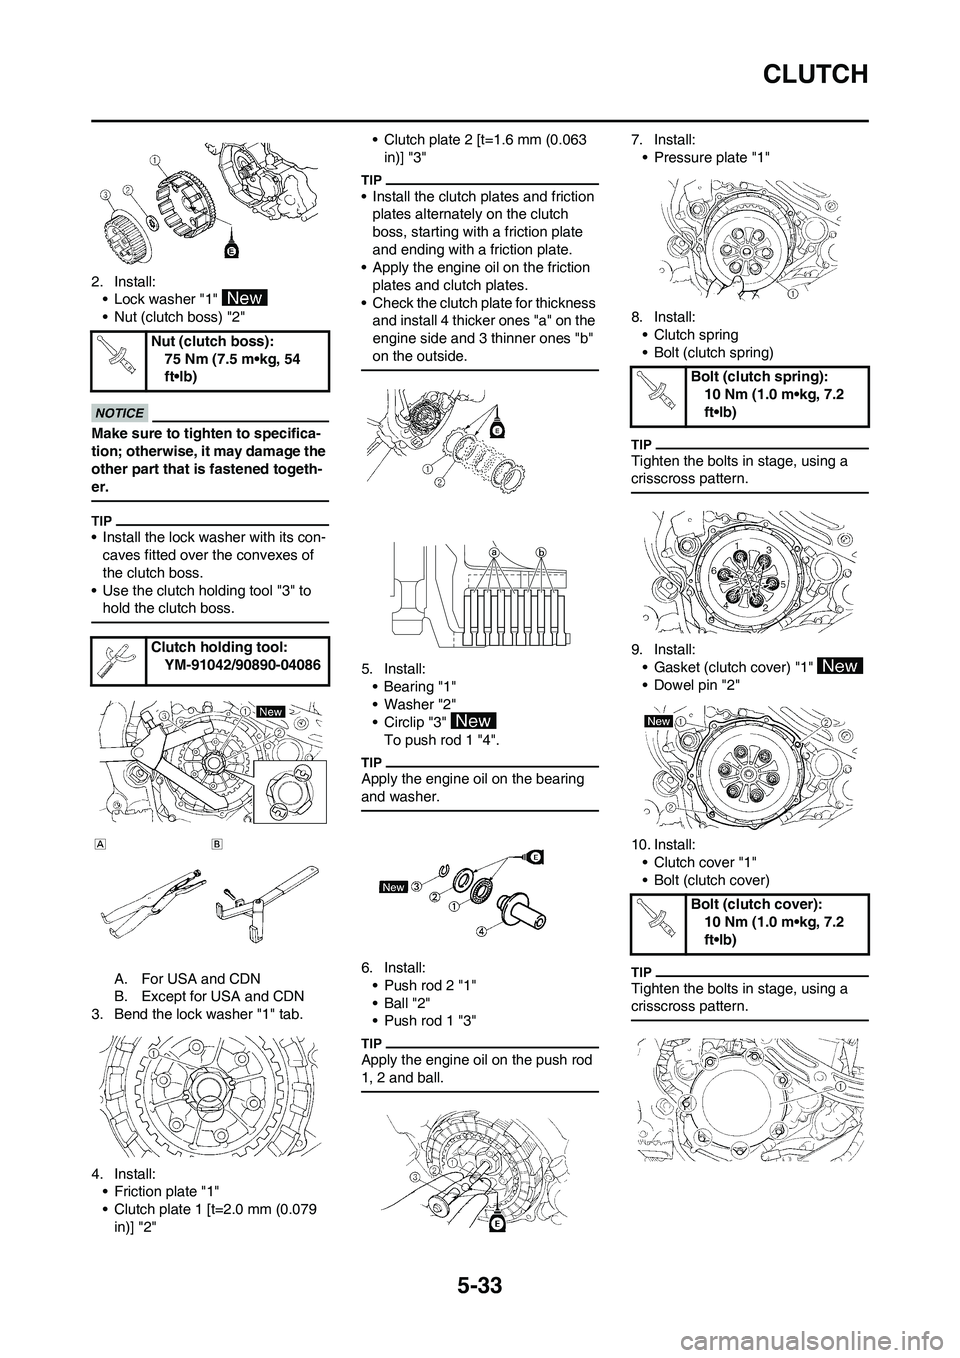 YAMAHA WR 450F 2010 Owners Manual 5-33
CLUTCH
2. Install:
• Lock washer "1" 
• Nut (clutch boss) "2"
Make sure to tighten to specifica-
tion; otherwise, it may damage the 
other part that is fastened togeth-
er.
• Install the lo